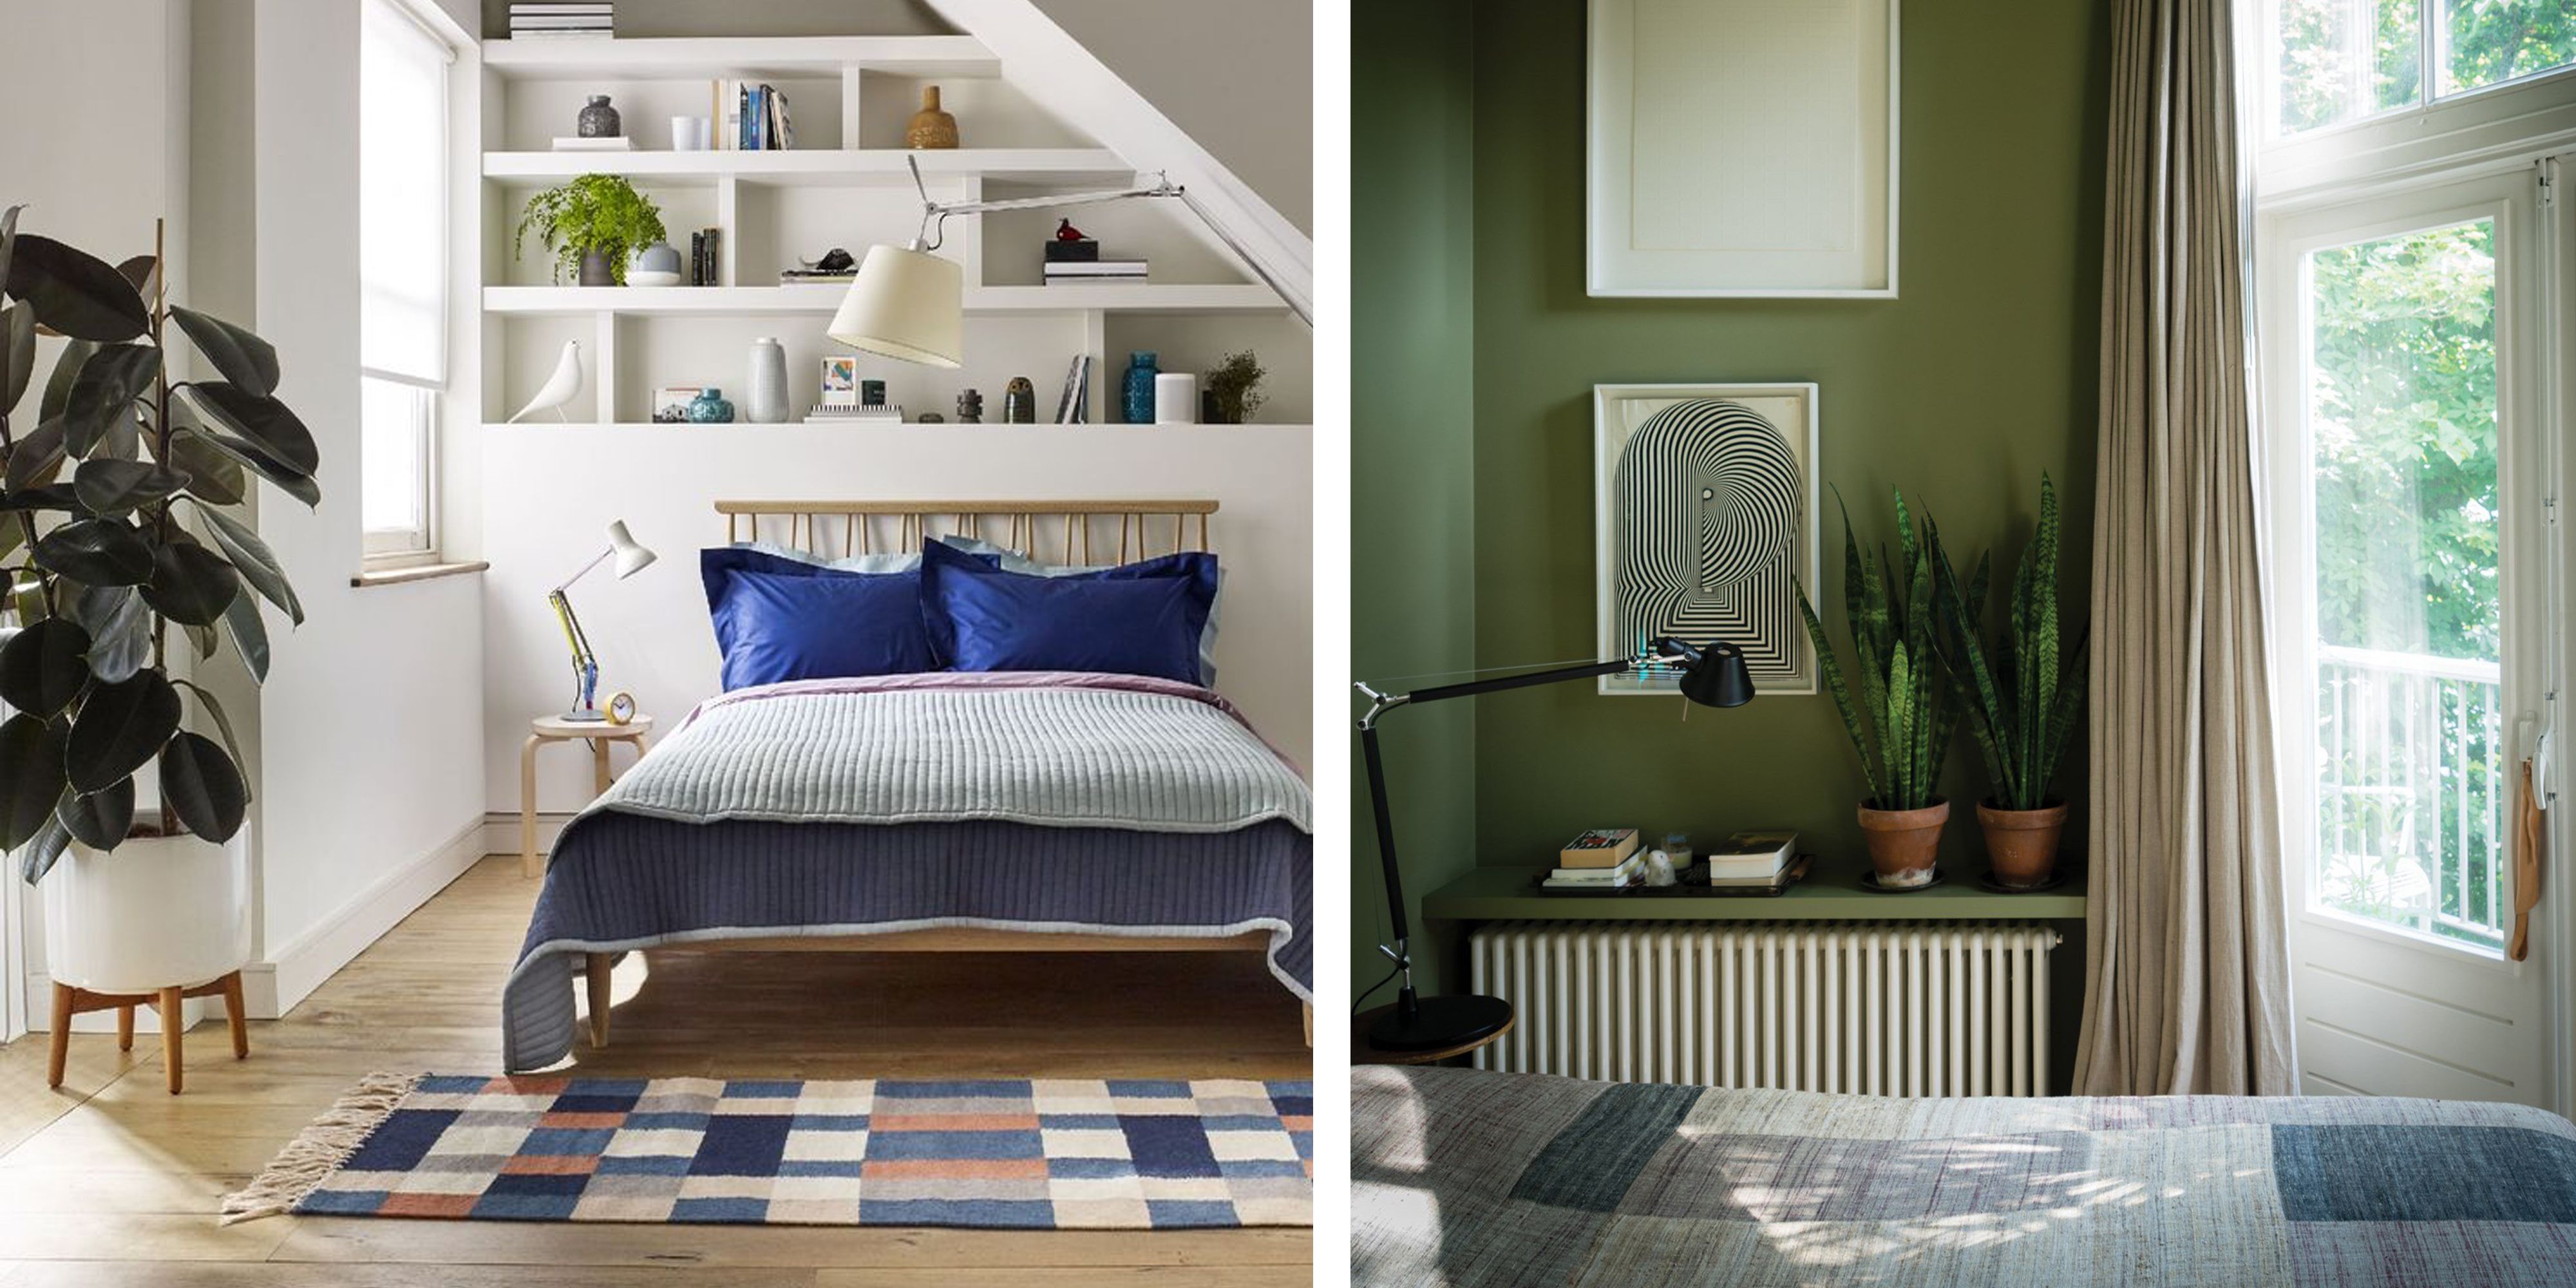 6 Small Bedroom Decorating Ideas To Fall In Love With